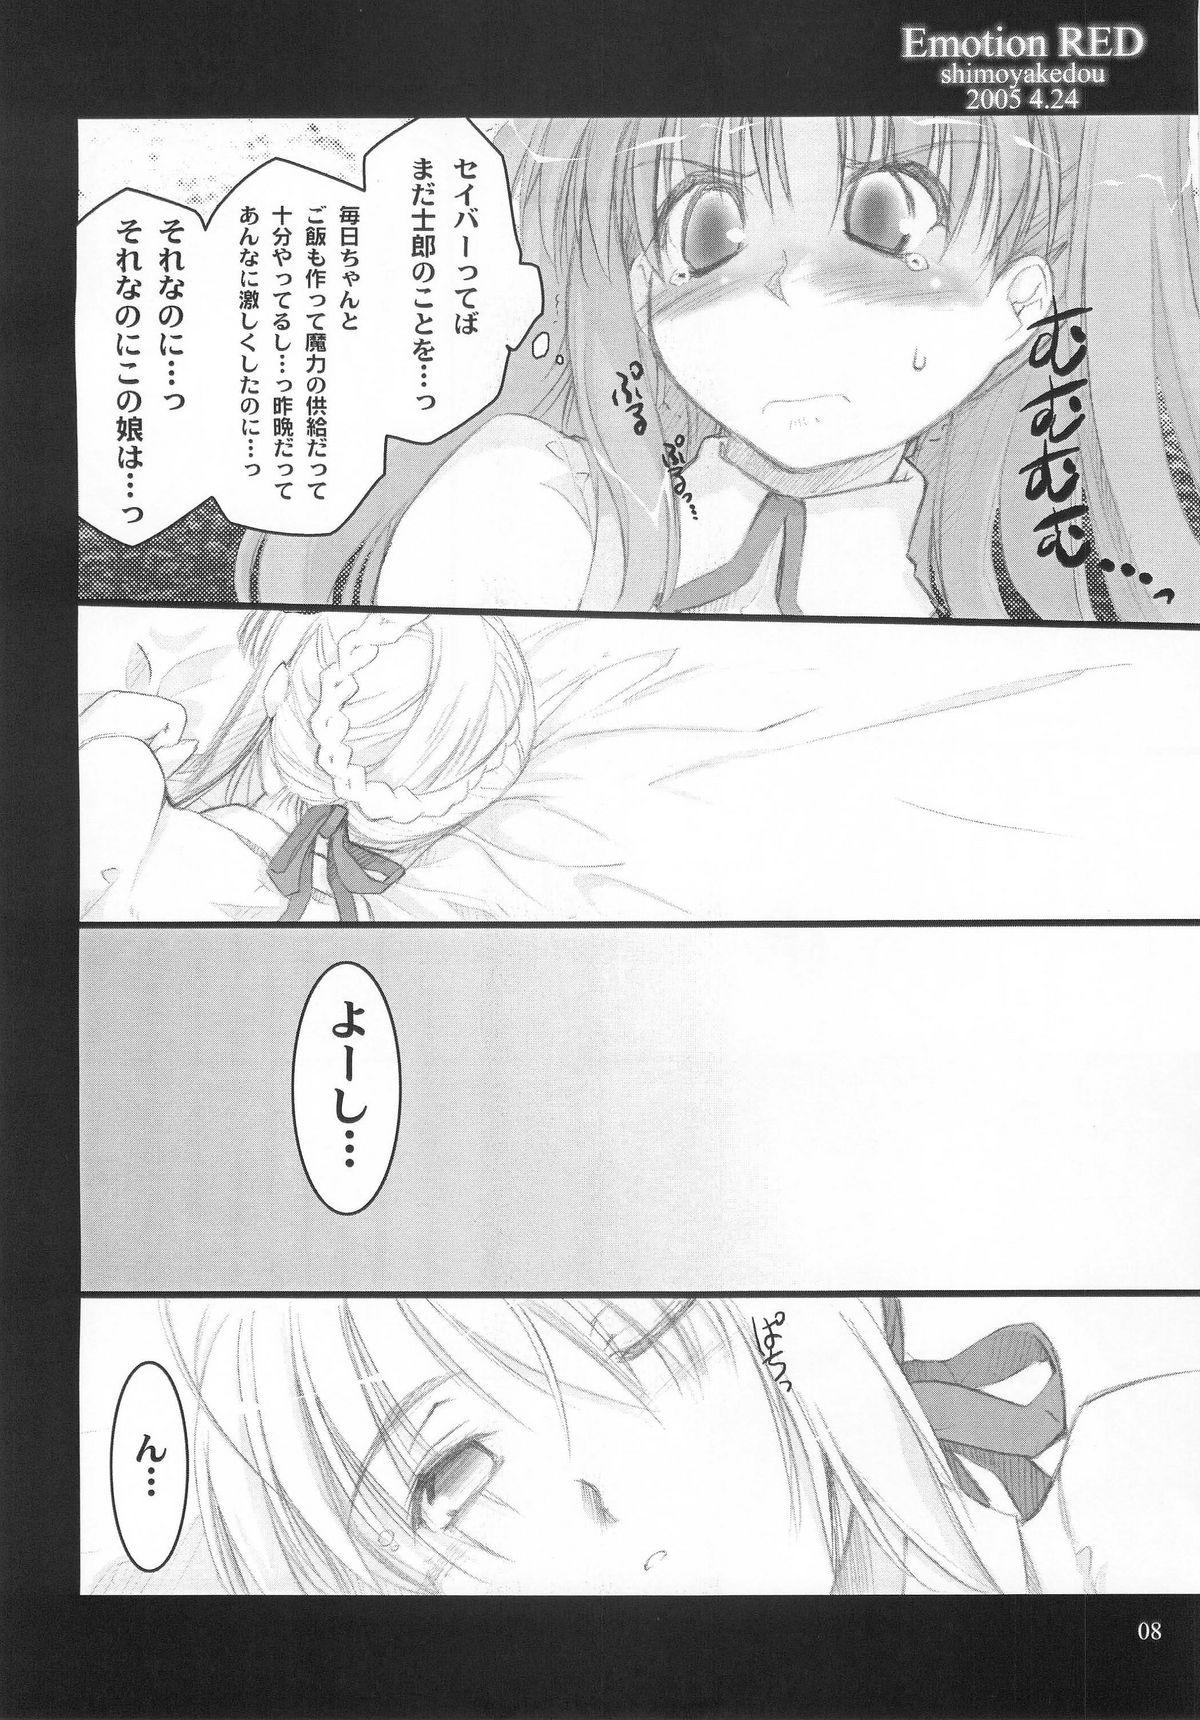 Sesso Emotion RED - Fate stay night Gay Trimmed - Page 7